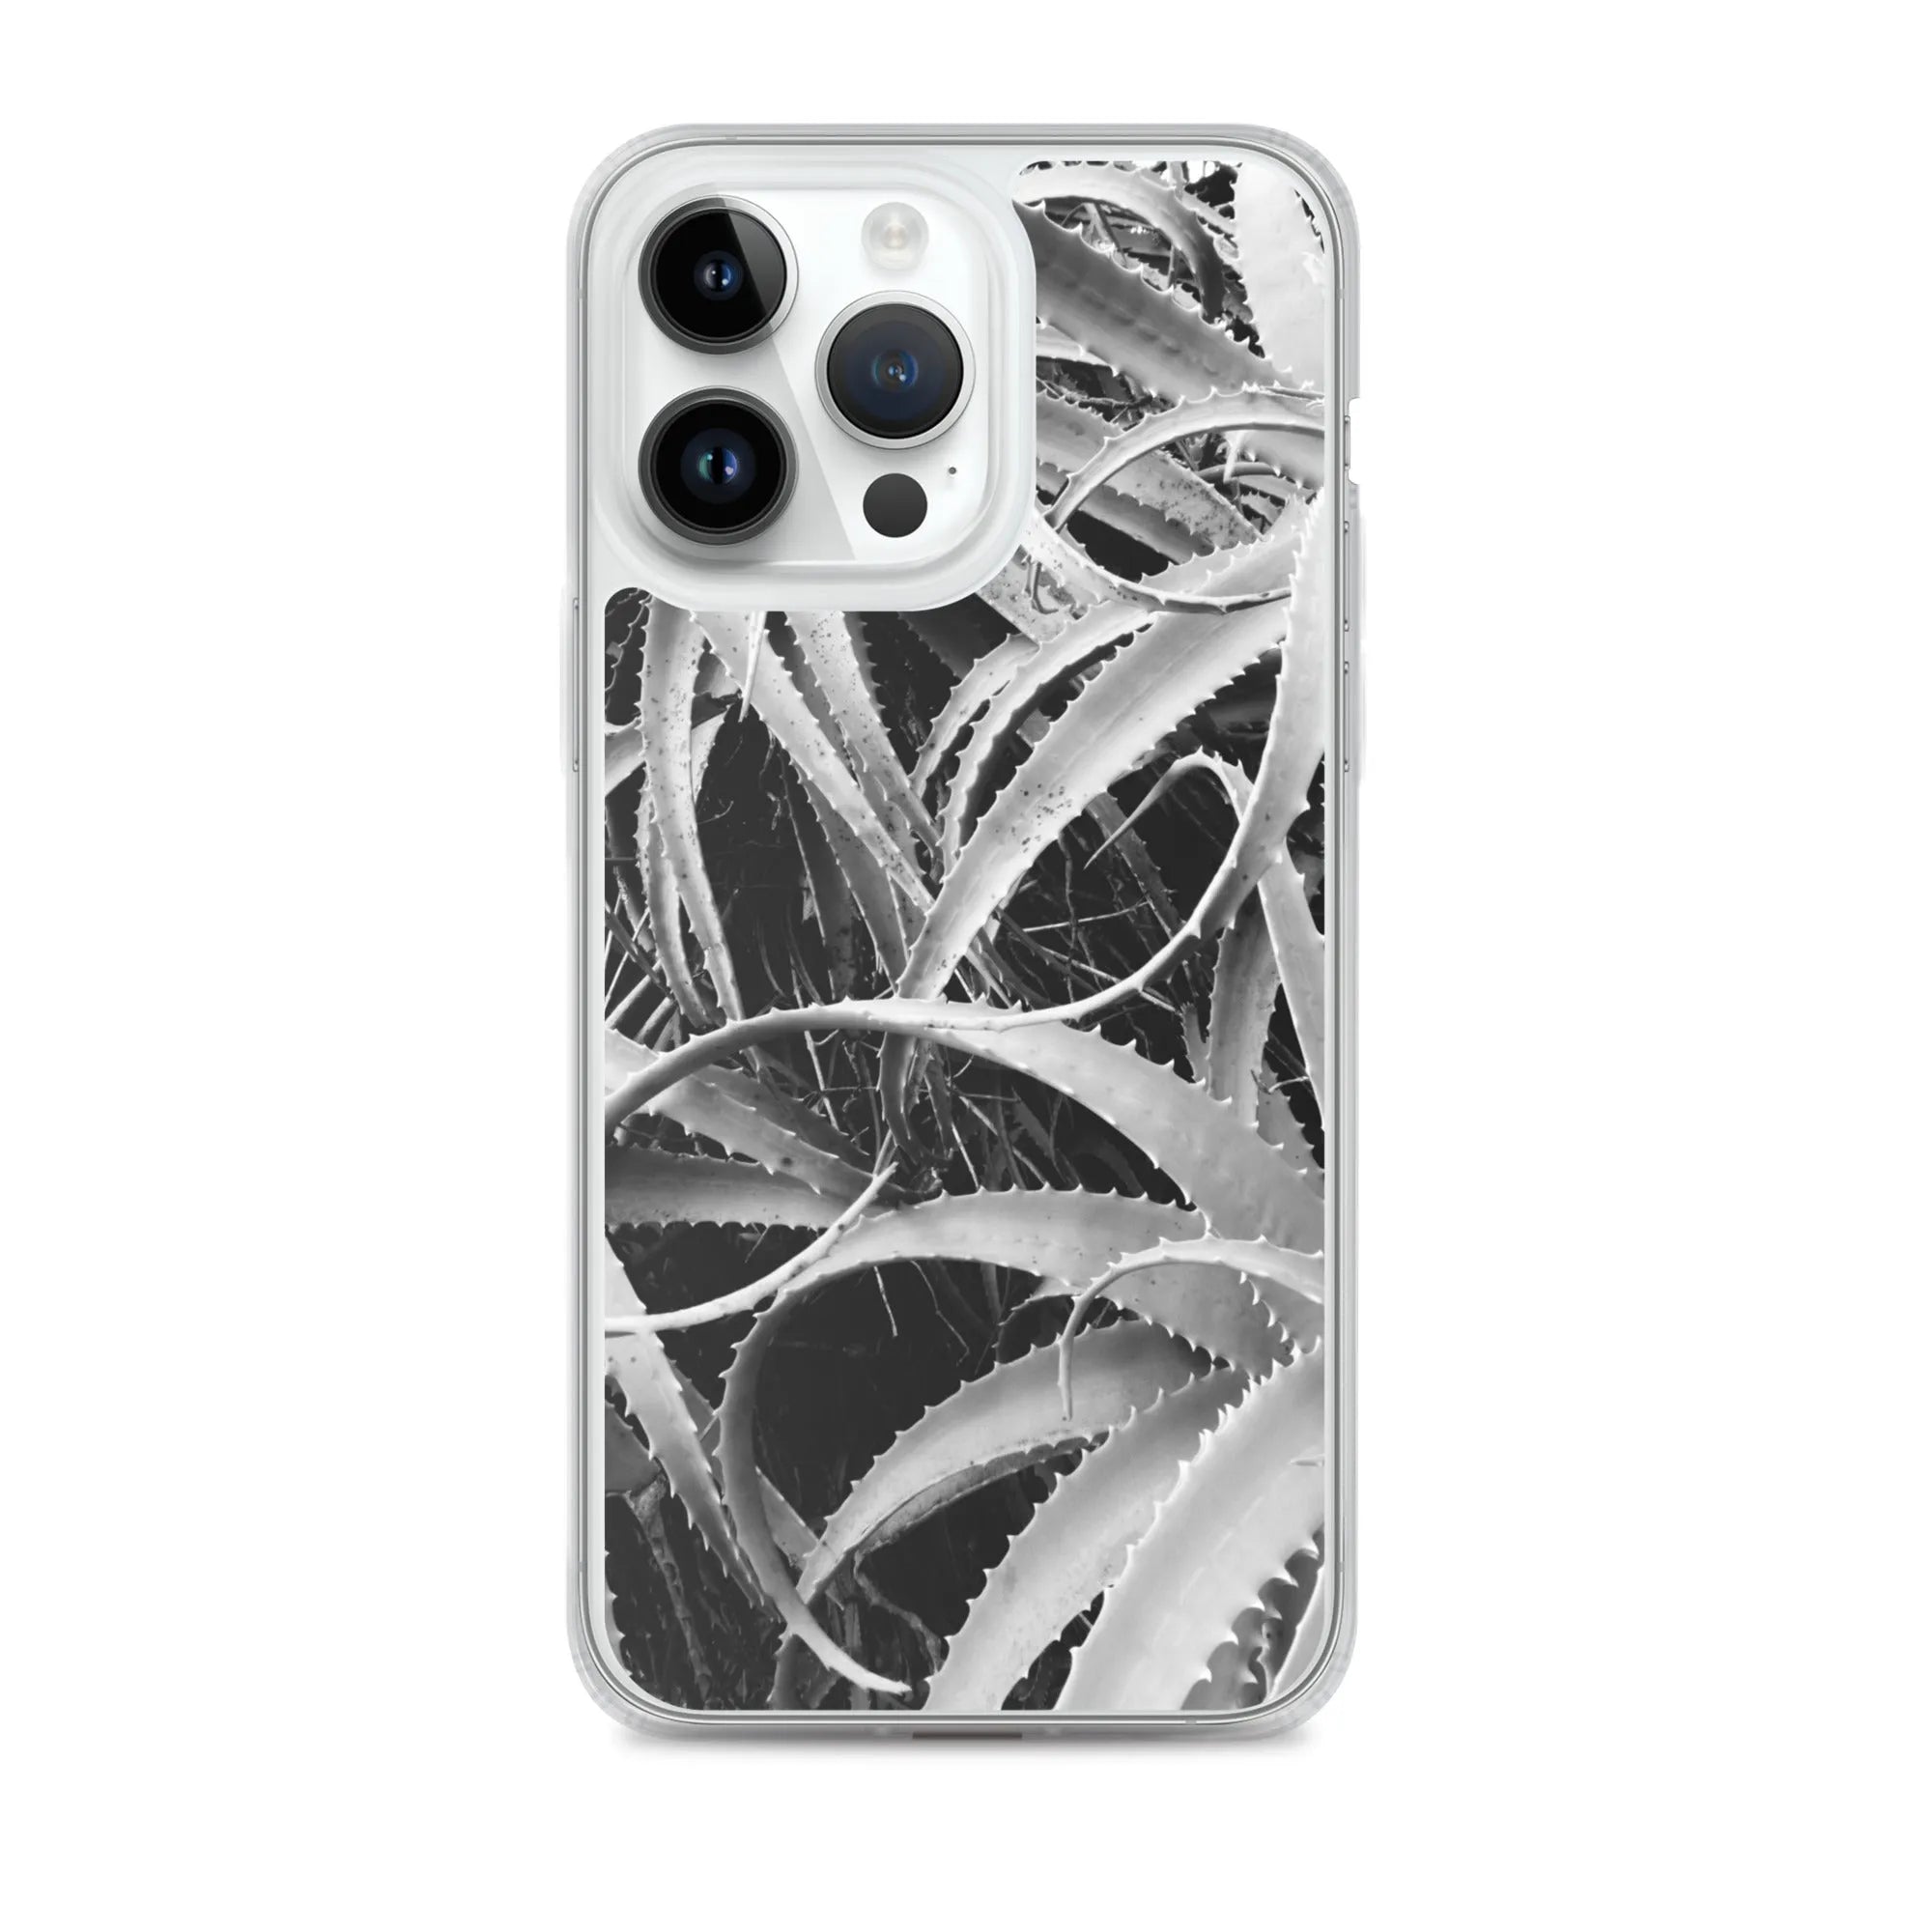 Spiked 2 + Too Botanical Art Iphone Case - Black And White - Iphone 14 Pro Max - Mobile Phone Cases - Aesthetic Art